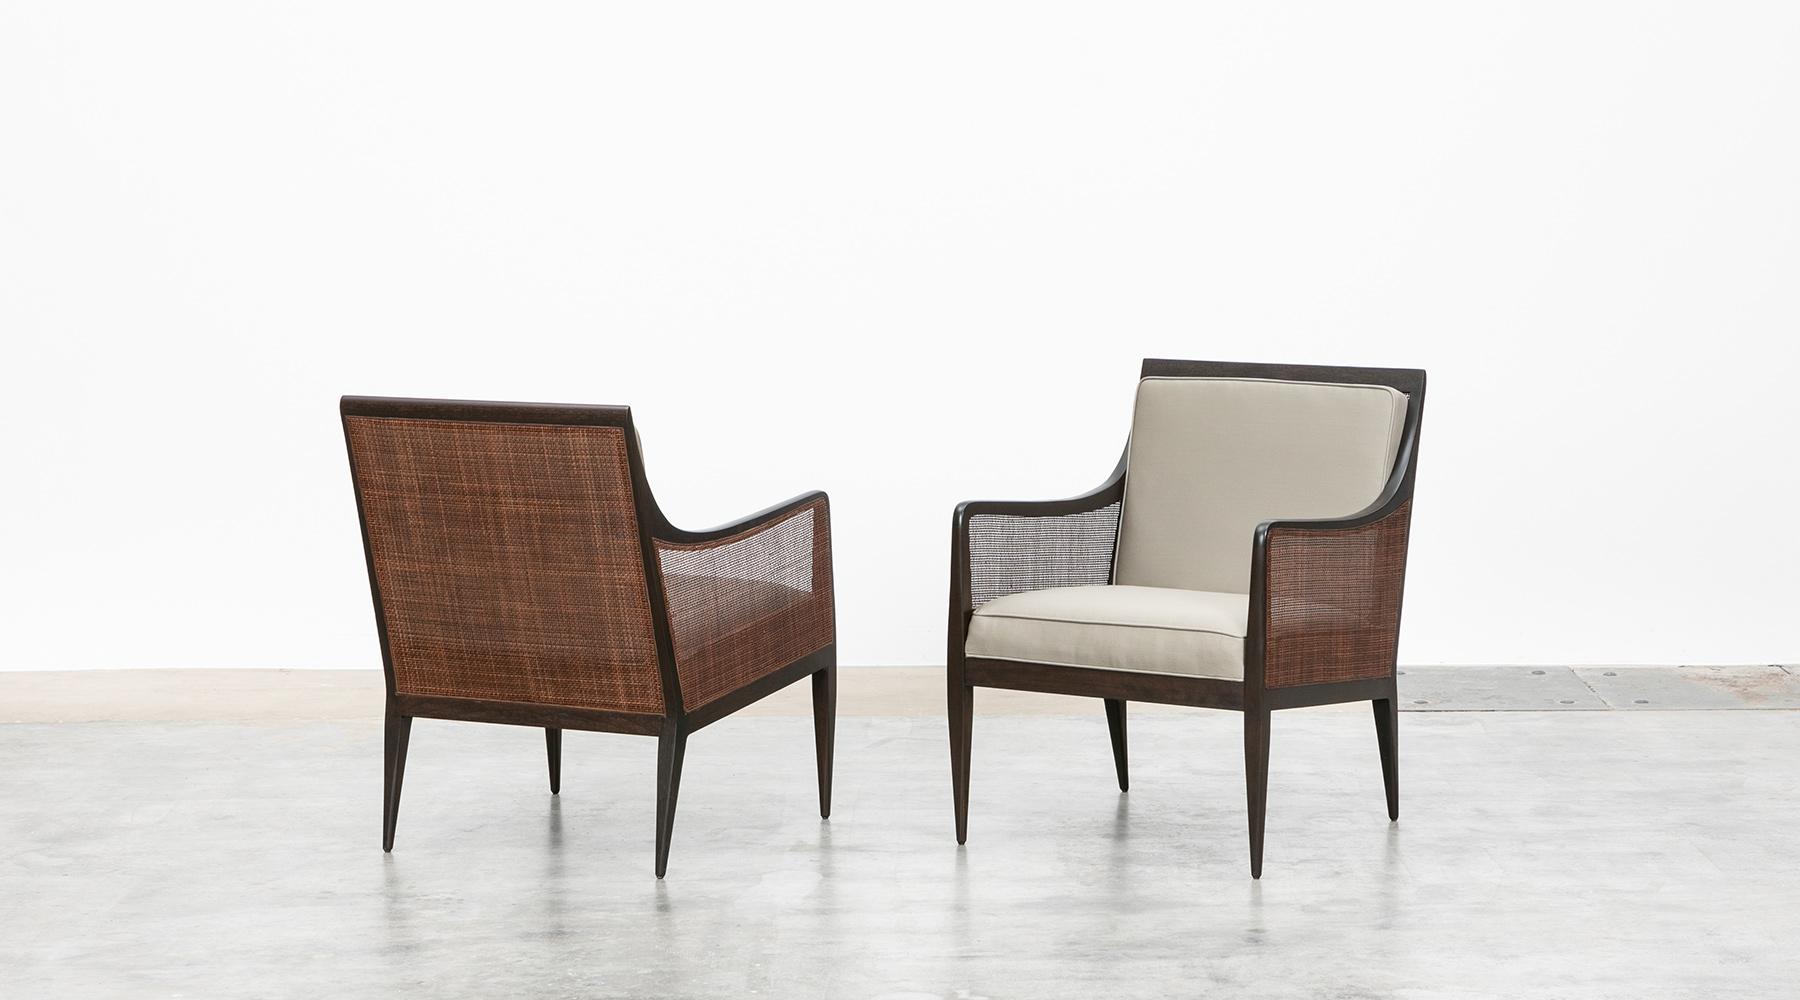 Lounge chairs, walnut and cane, new upholstery, Kipp Stewart, USA, 1950s.

Elegant pair of armchairs in solid walnut with caned back and sides designed by Kipp Stewart. The caning and wood are in excellent condition. The back cushion is removable